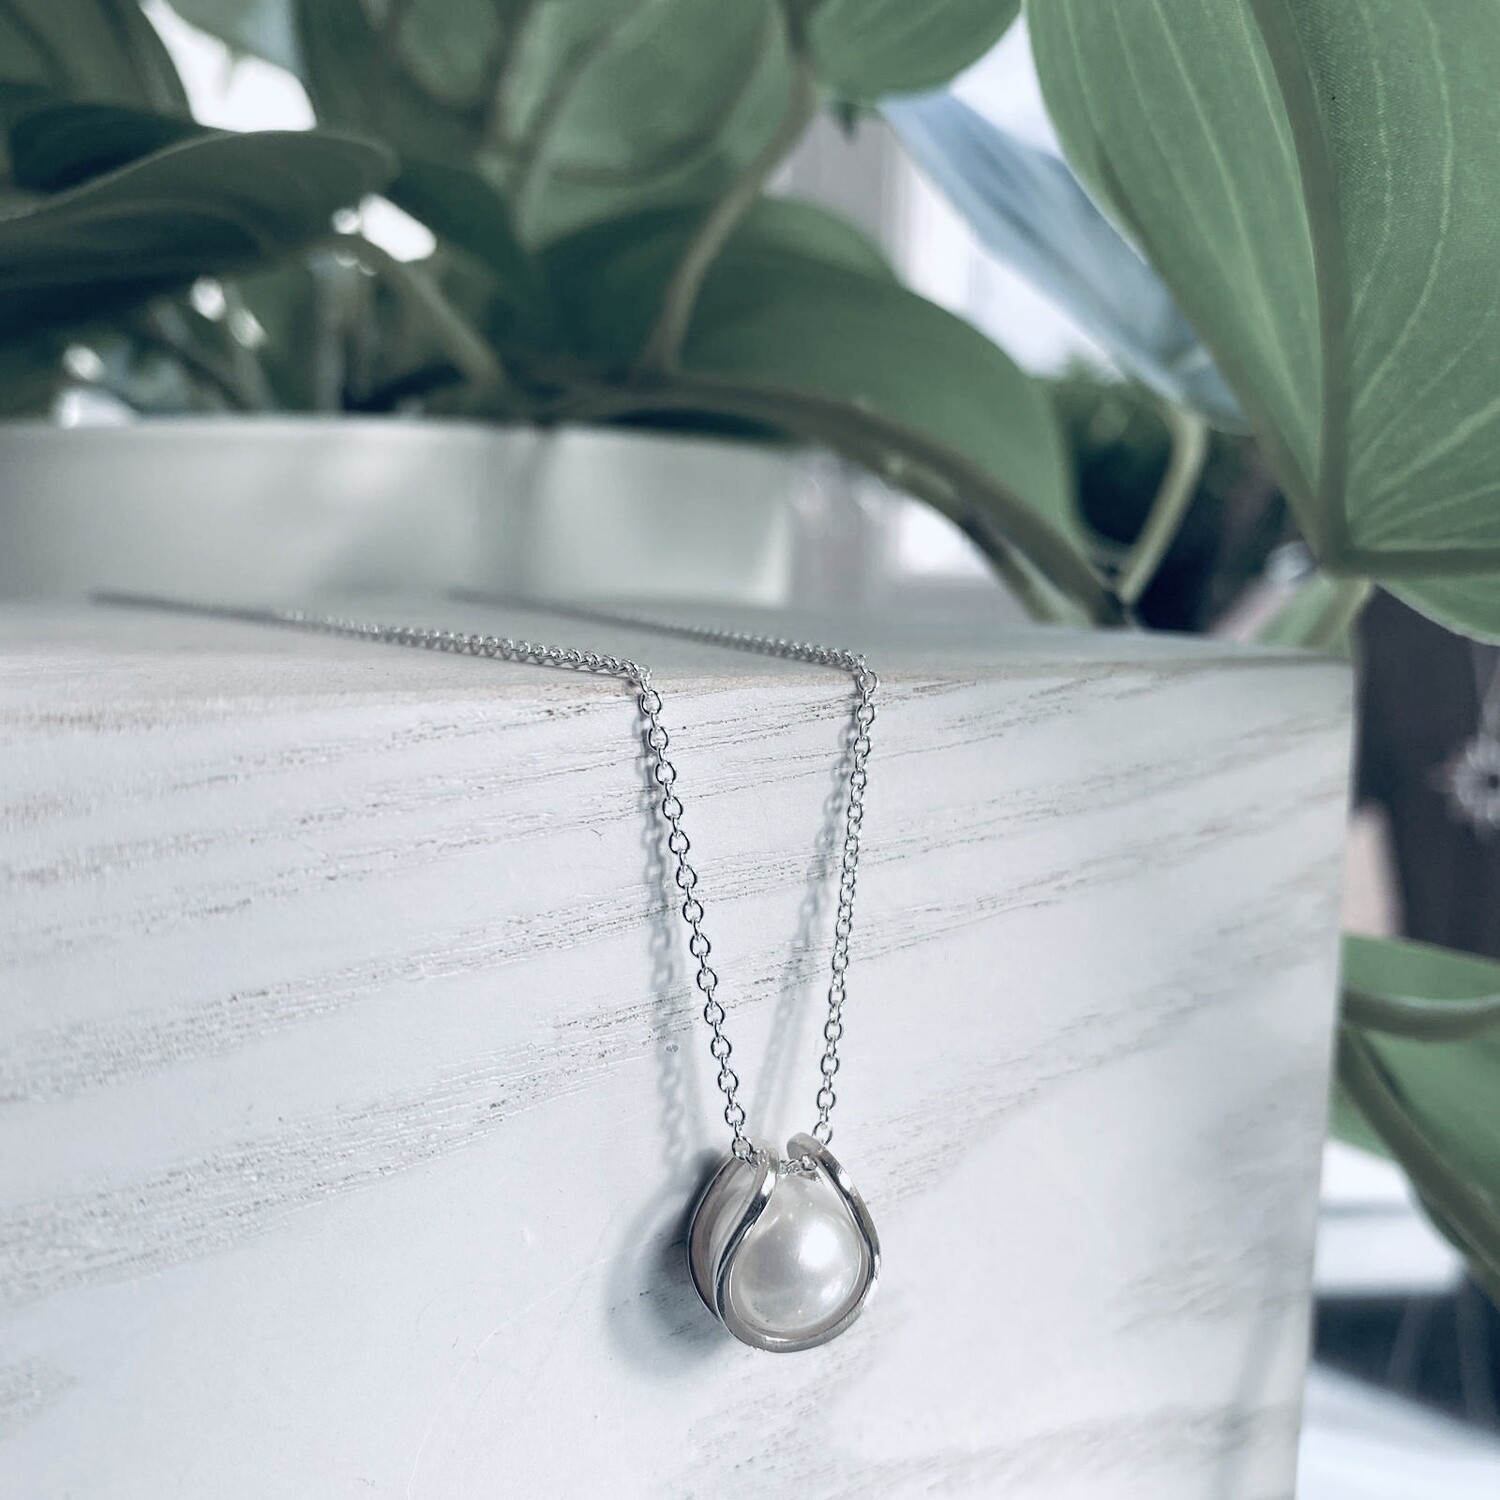 Sling-shot orbit pendant with pearl in silver